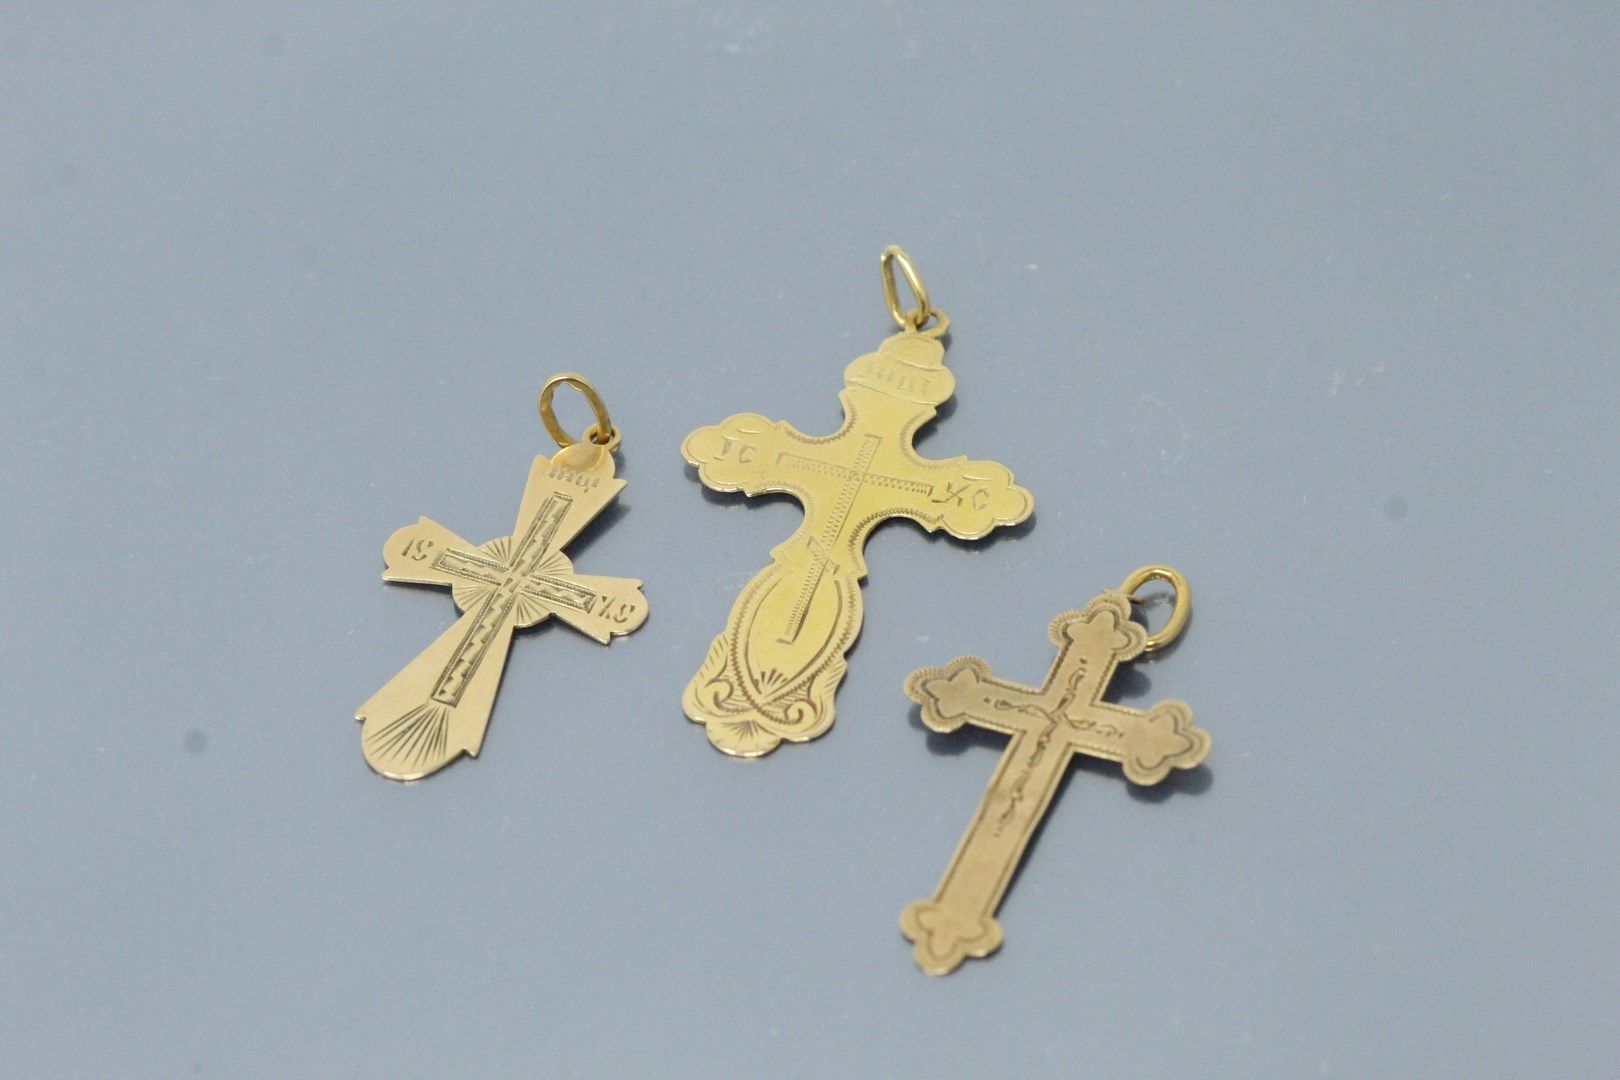 Null Set of 3 14k (585) yellow gold pententifs in the shape of a cross

Probably&hellip;